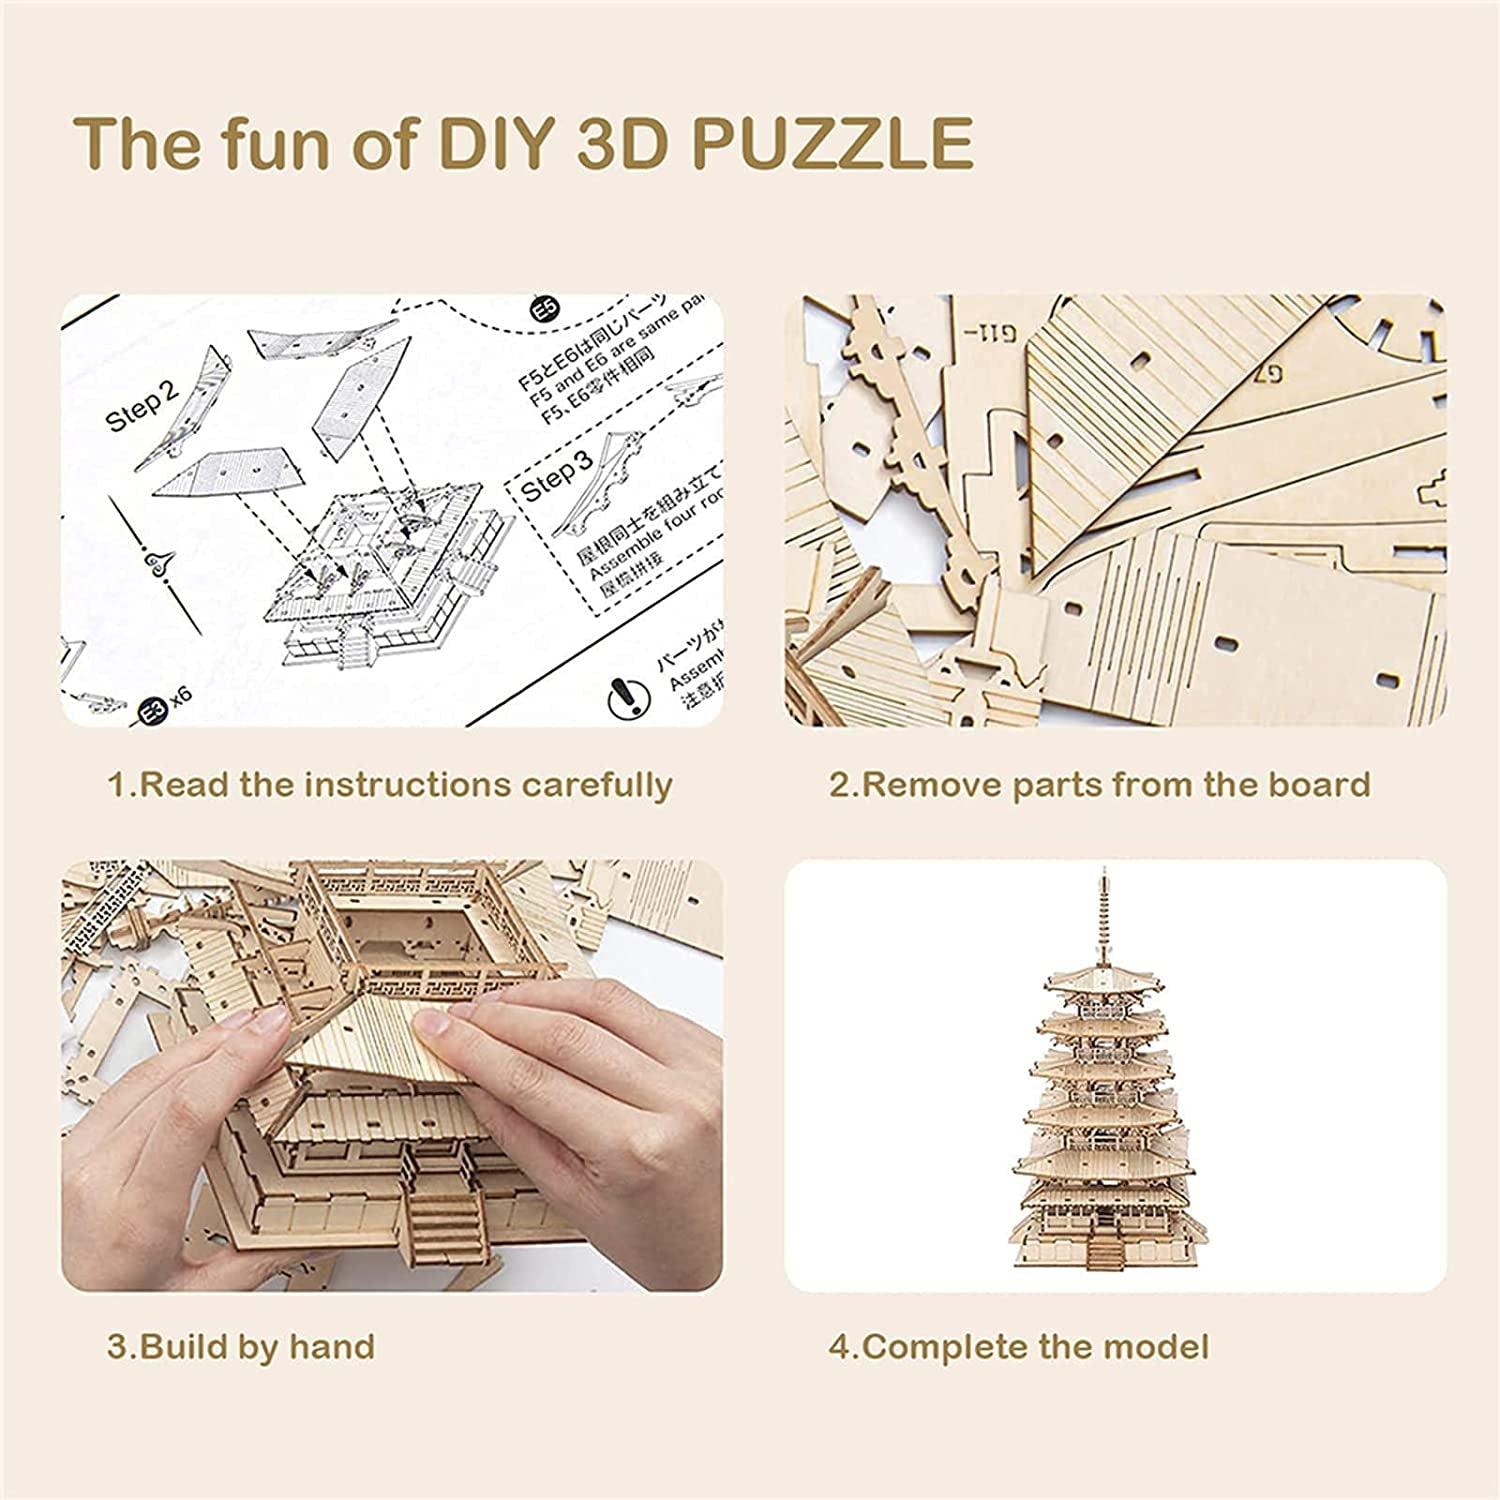 3D Puzzles for Adults, Wooden Model Kits for Adults to Build, Gift on Birthday Christmas - Five-Storied Pagoda - WoodArtSupply